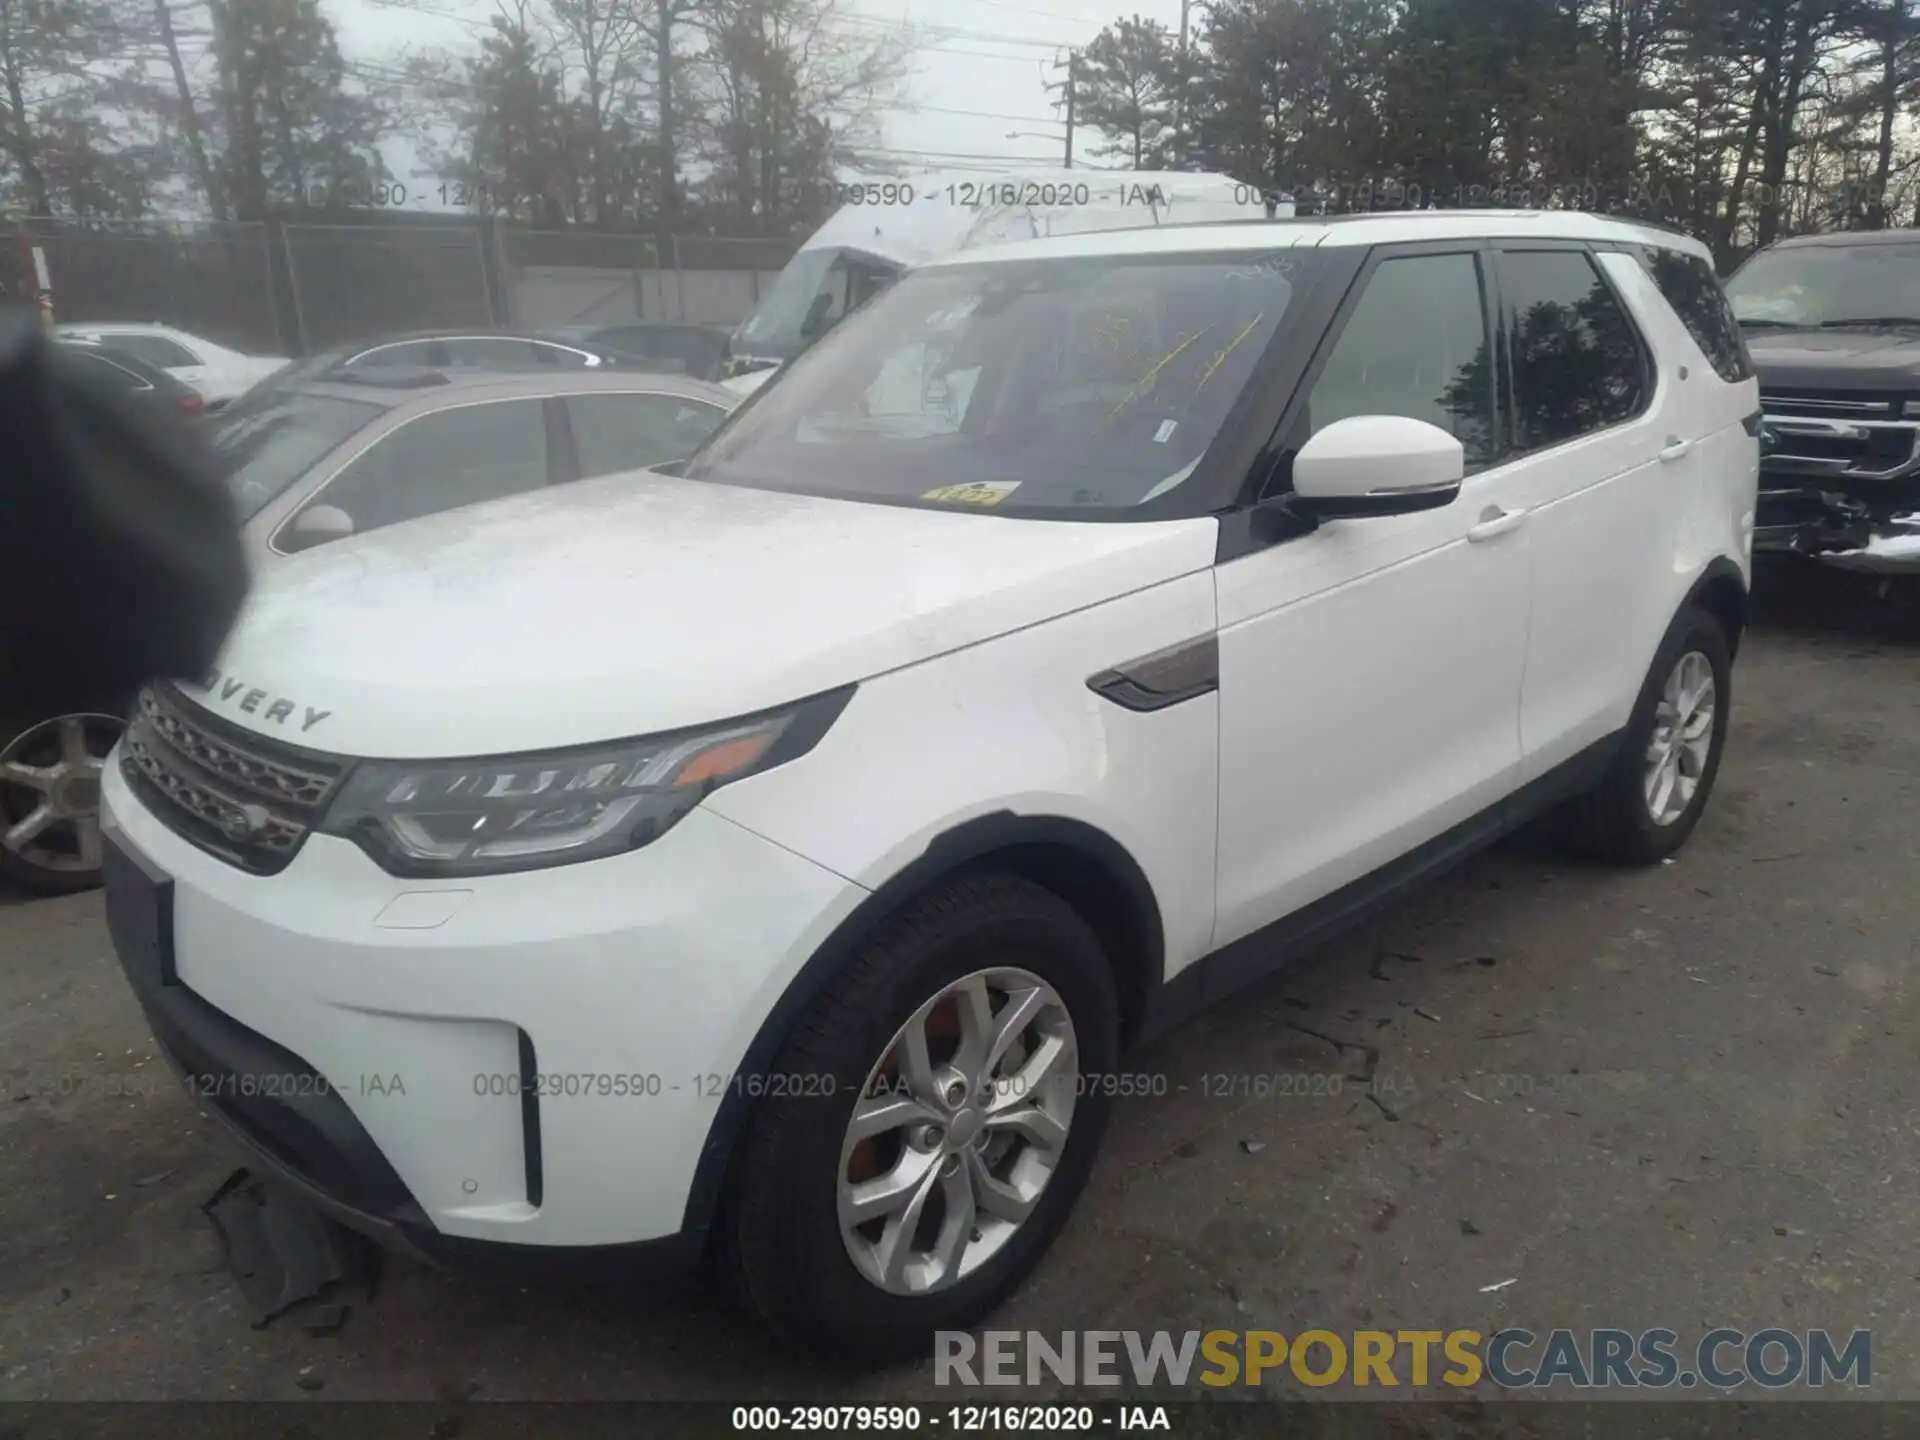 2 Photograph of a damaged car SALRG2RV7L2425164 LAND ROVER DISCOVERY 2020